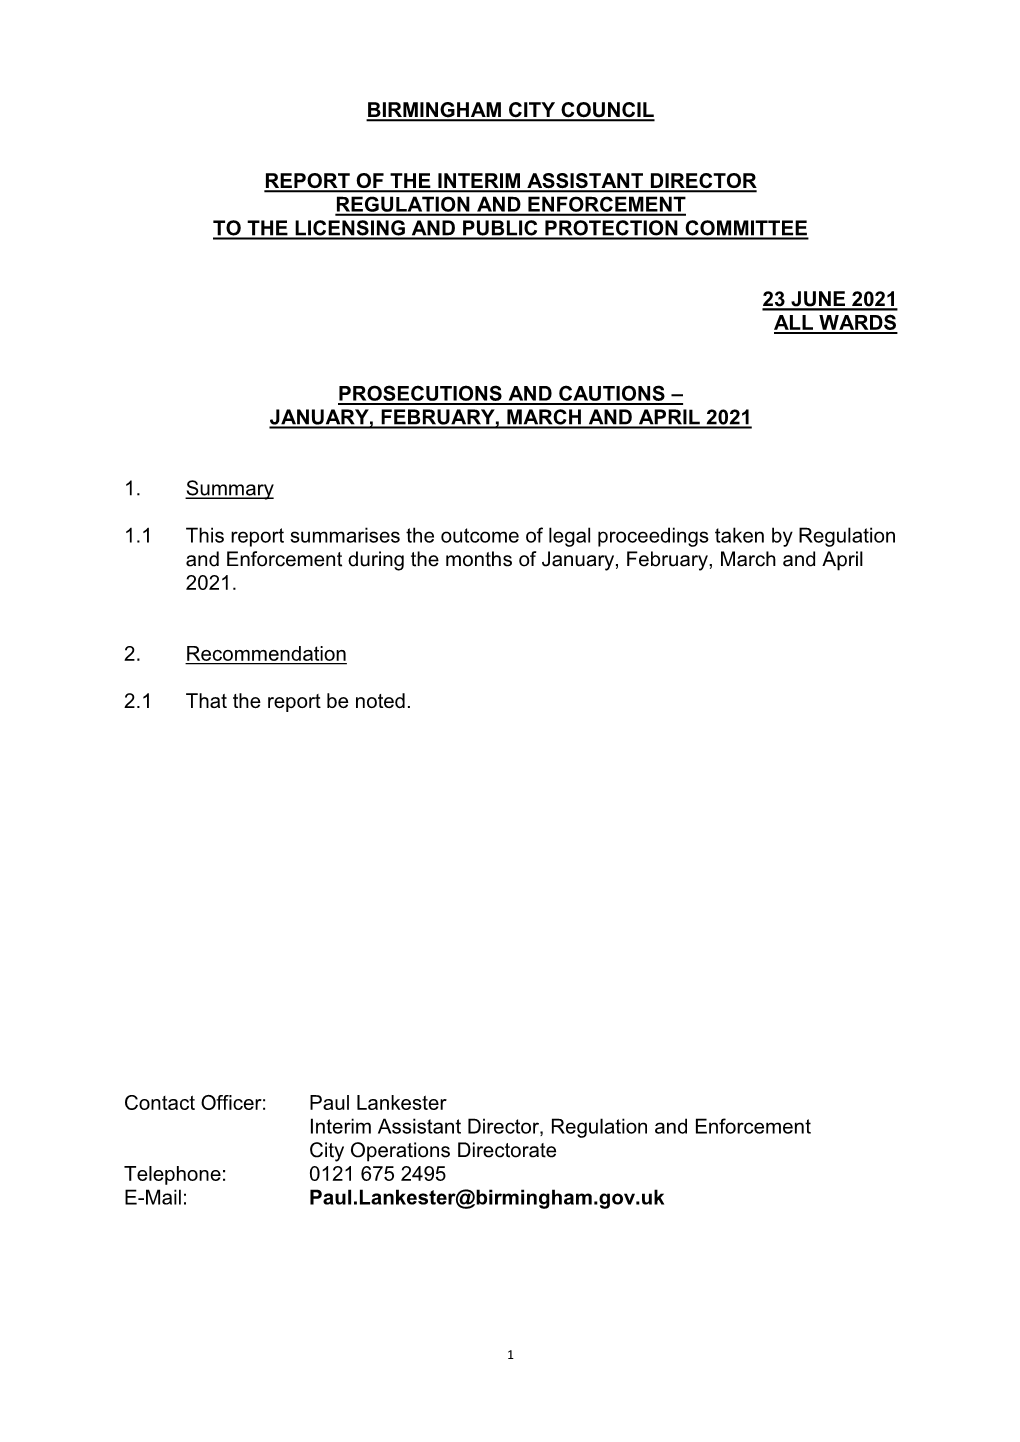 Birmingham City Council Report of the Interim Assistant Director Regulation and Enforcement to the Licensing and Public Protec